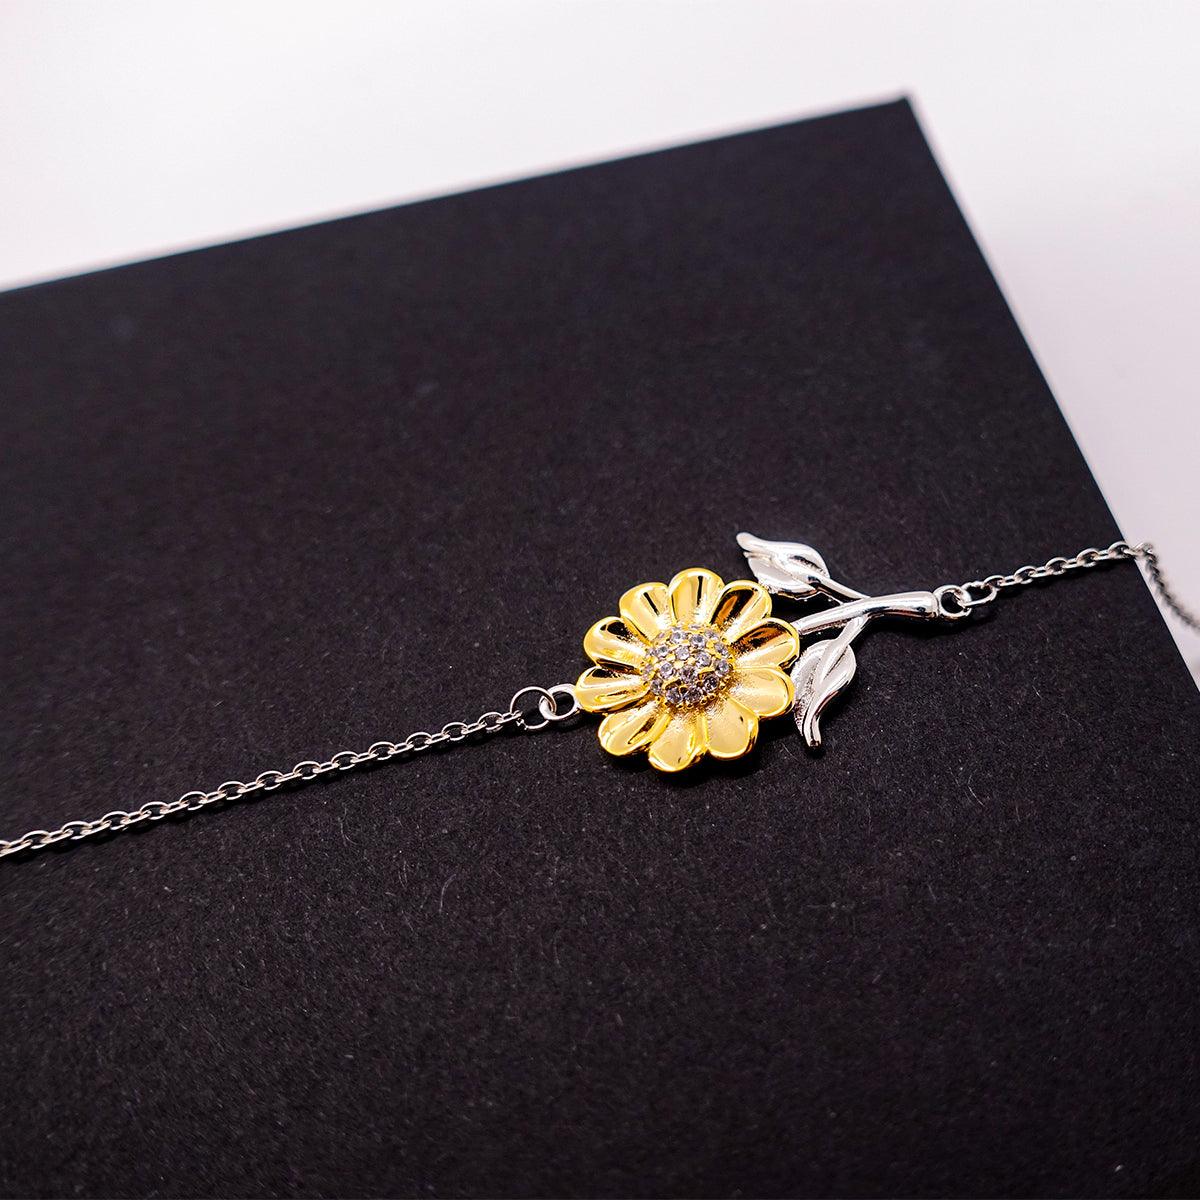 Remarkable Auditor Gifts, Your dedication and hard work, Inspirational Birthday Christmas Unique Sunflower Bracelet For Auditor, Coworkers, Men, Women, Friends - Mallard Moon Gift Shop